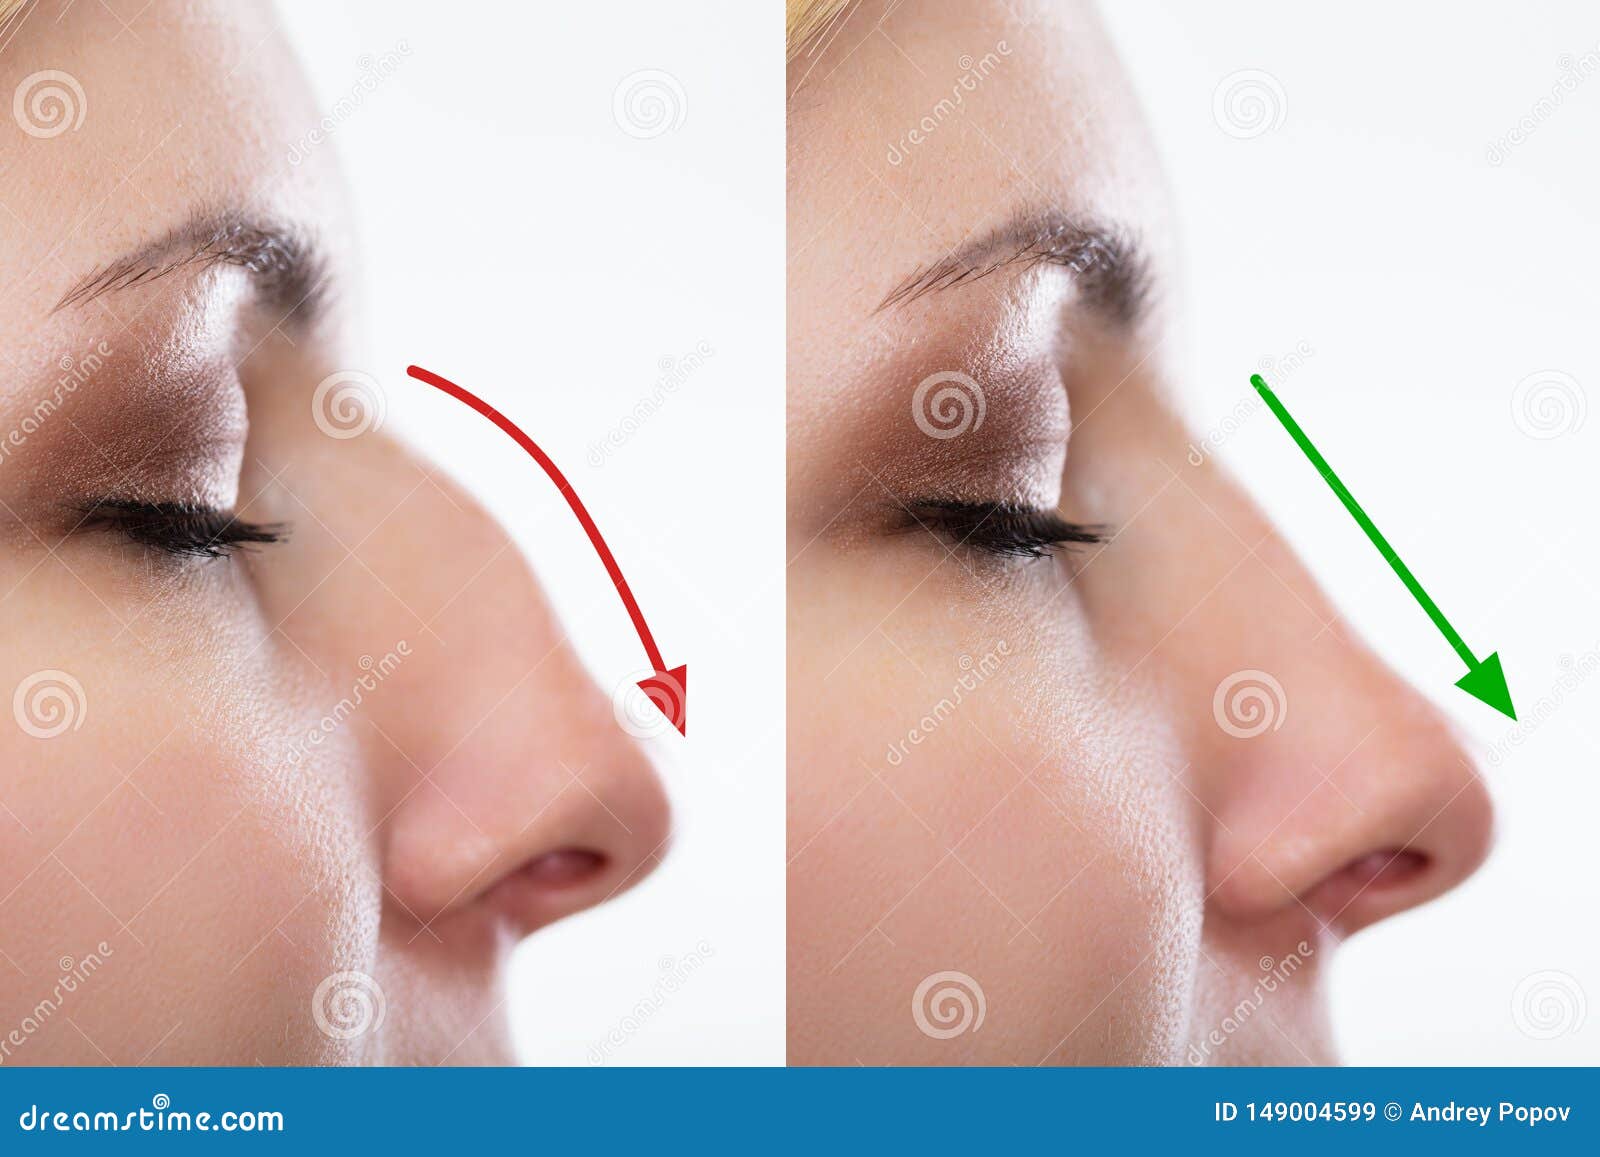 woman`s nose before and after plastic surgery